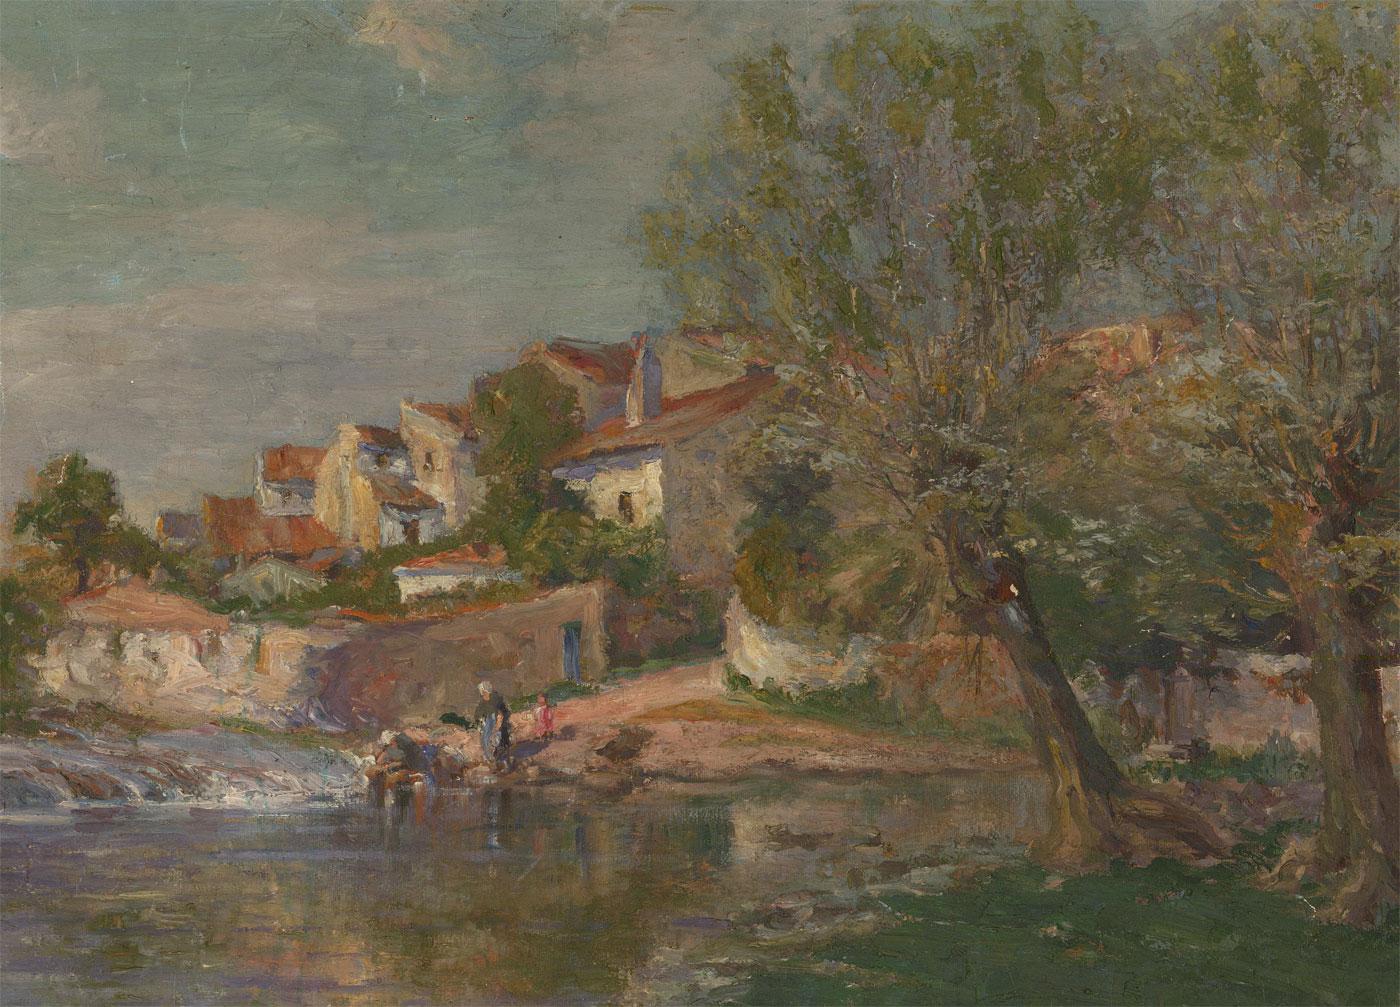 Unknown Landscape Painting - Manner of J. Falconer Slater (1857-1937) Oil, Laundry Day On The River